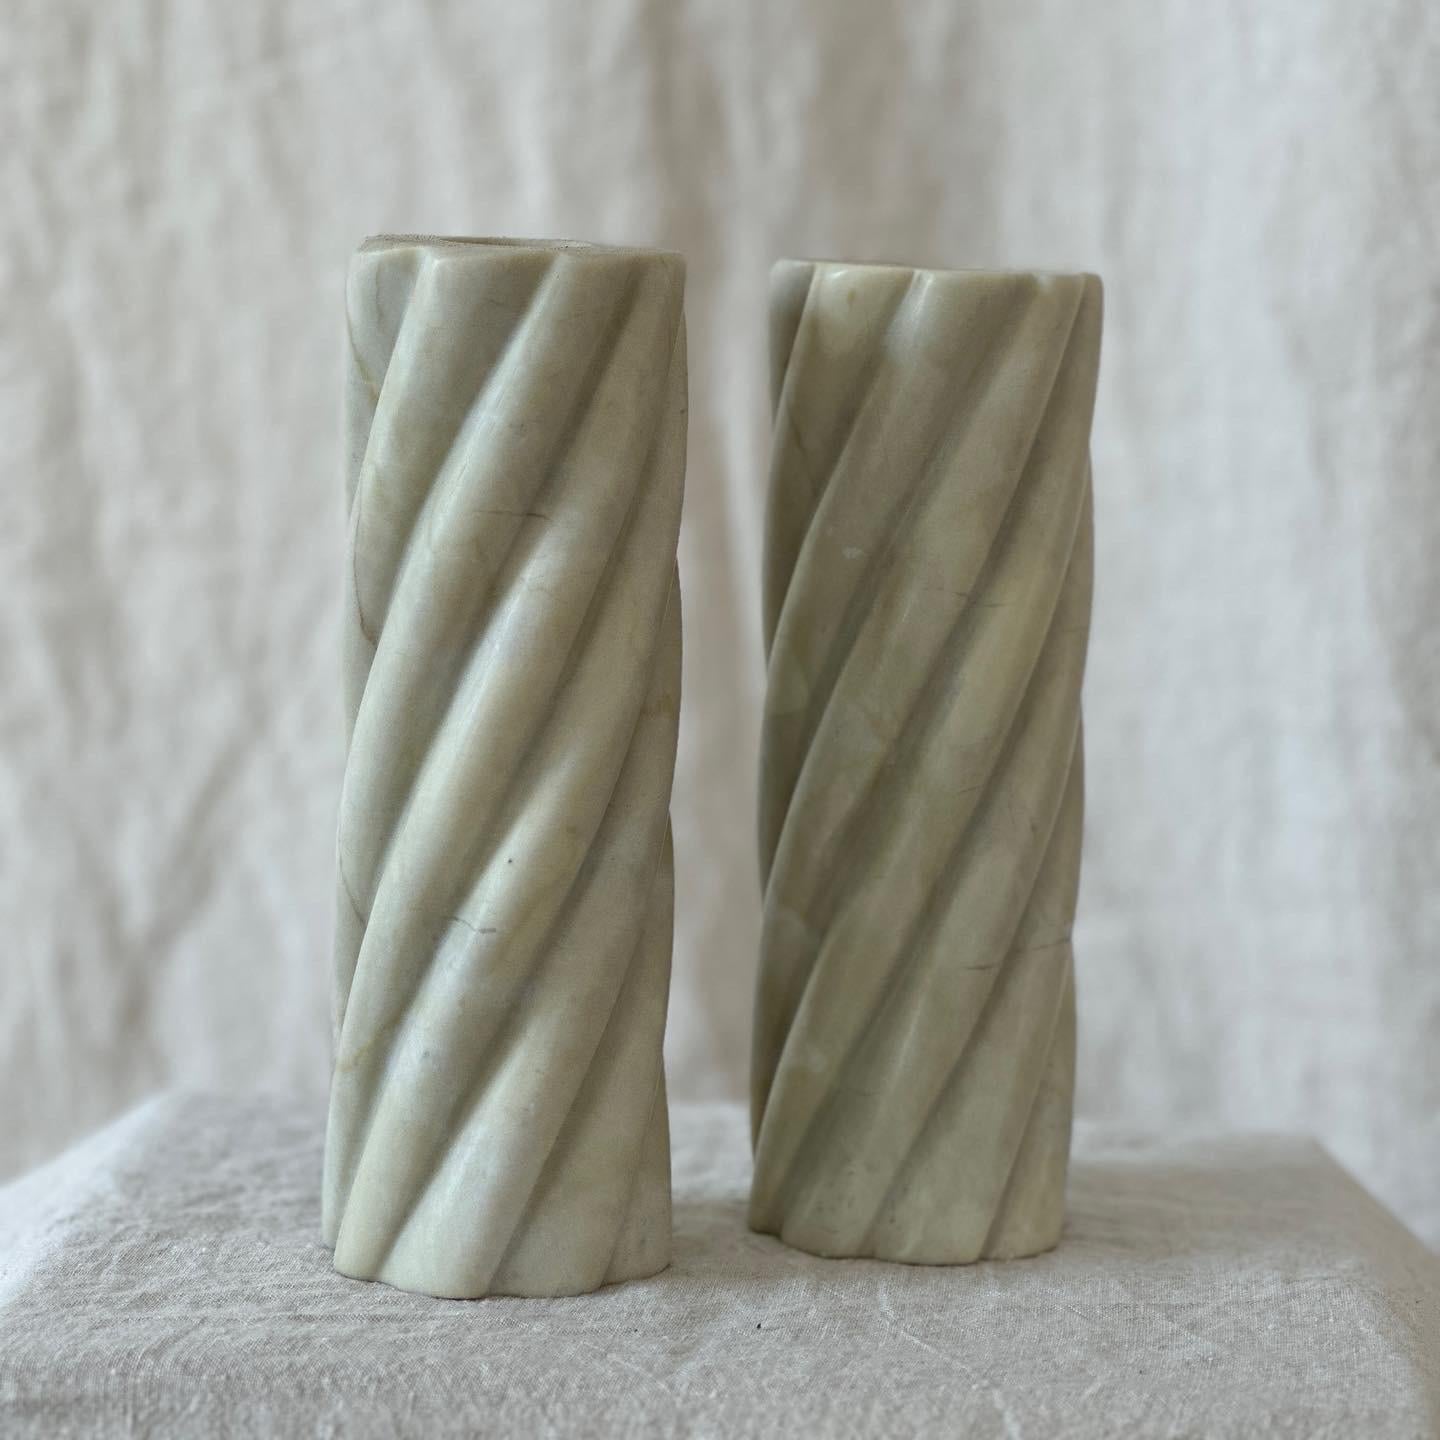 The Swell Candlesticks are a set of two tall taper holders cut from single pieces of stone, and hand-sculpted by artisans in Anastasio Home's growing atelier in Rajasthan, India. 

Arrives fully gift-packaged with a bow.

2.5